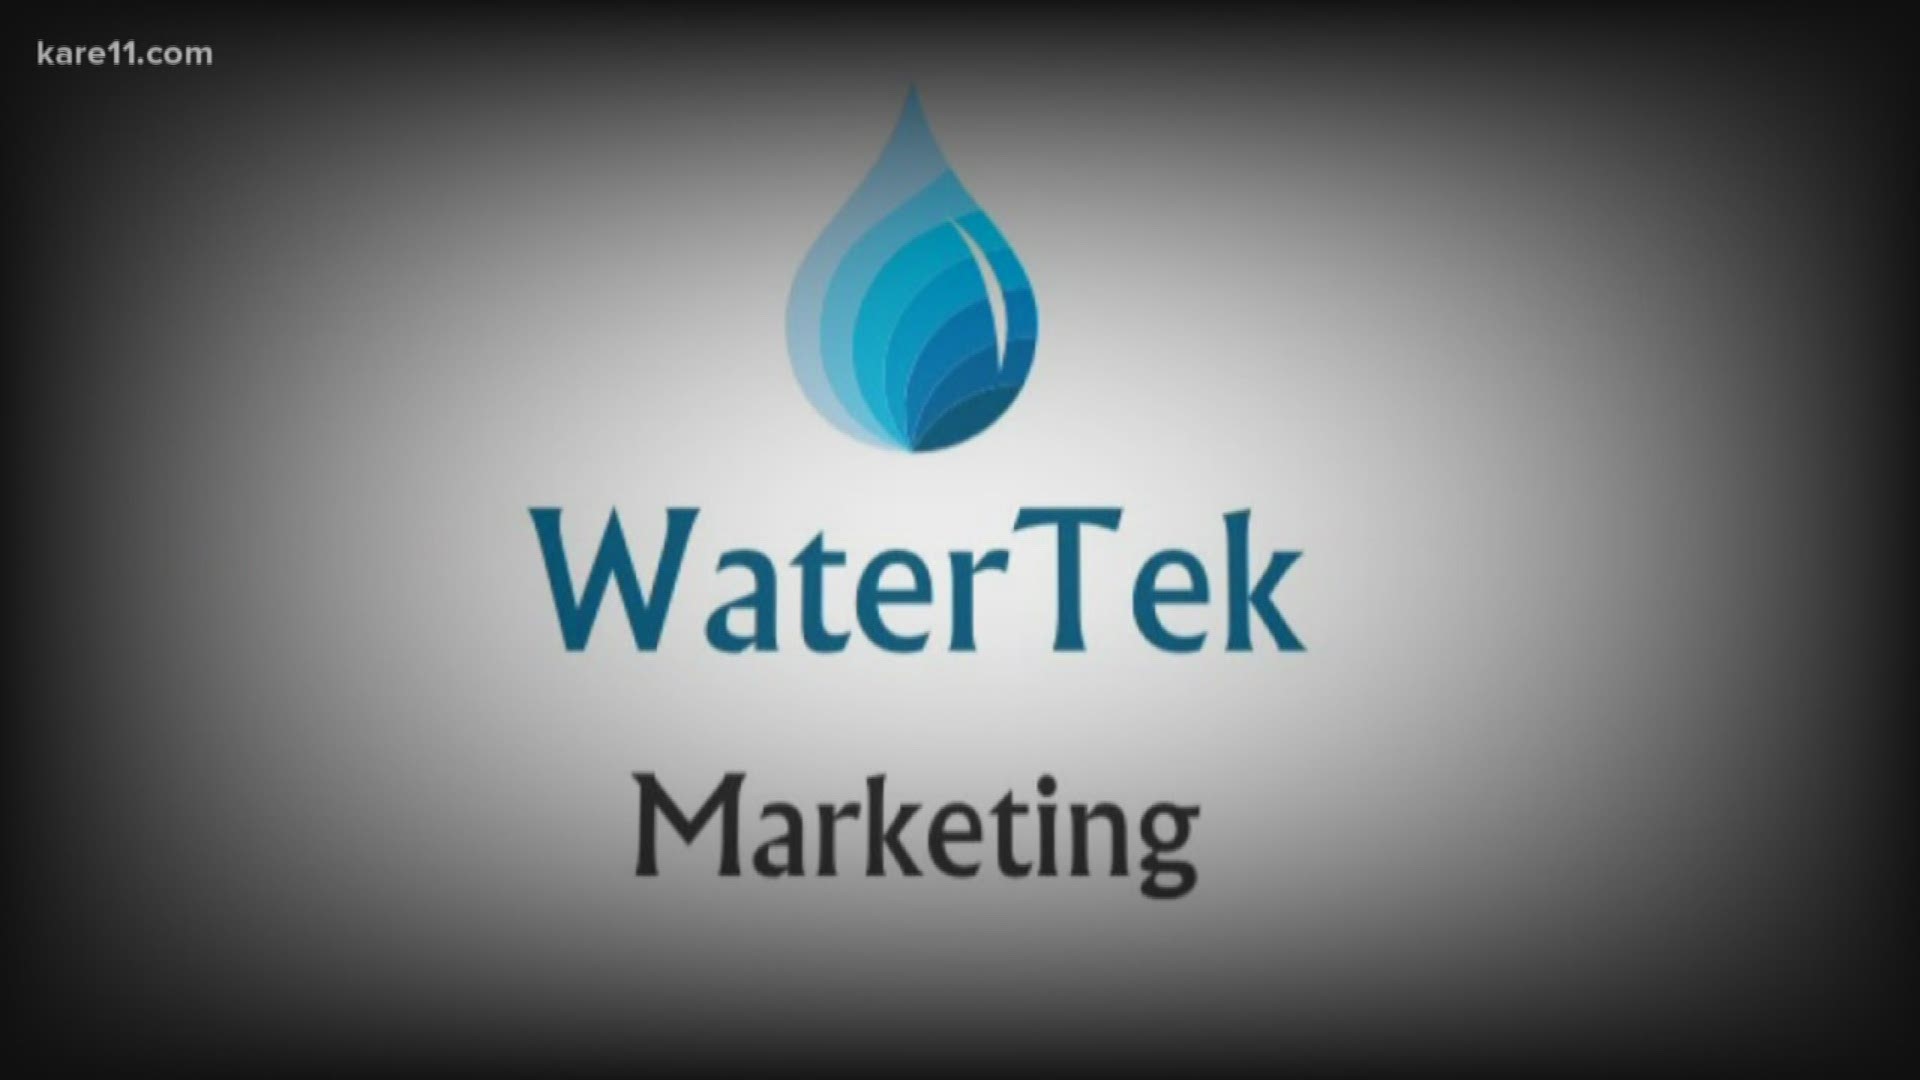 People from coast to coast claim WaterTek owes them thousands of dollars after failing to deliver promised jobs and expensive in-home water equipment.